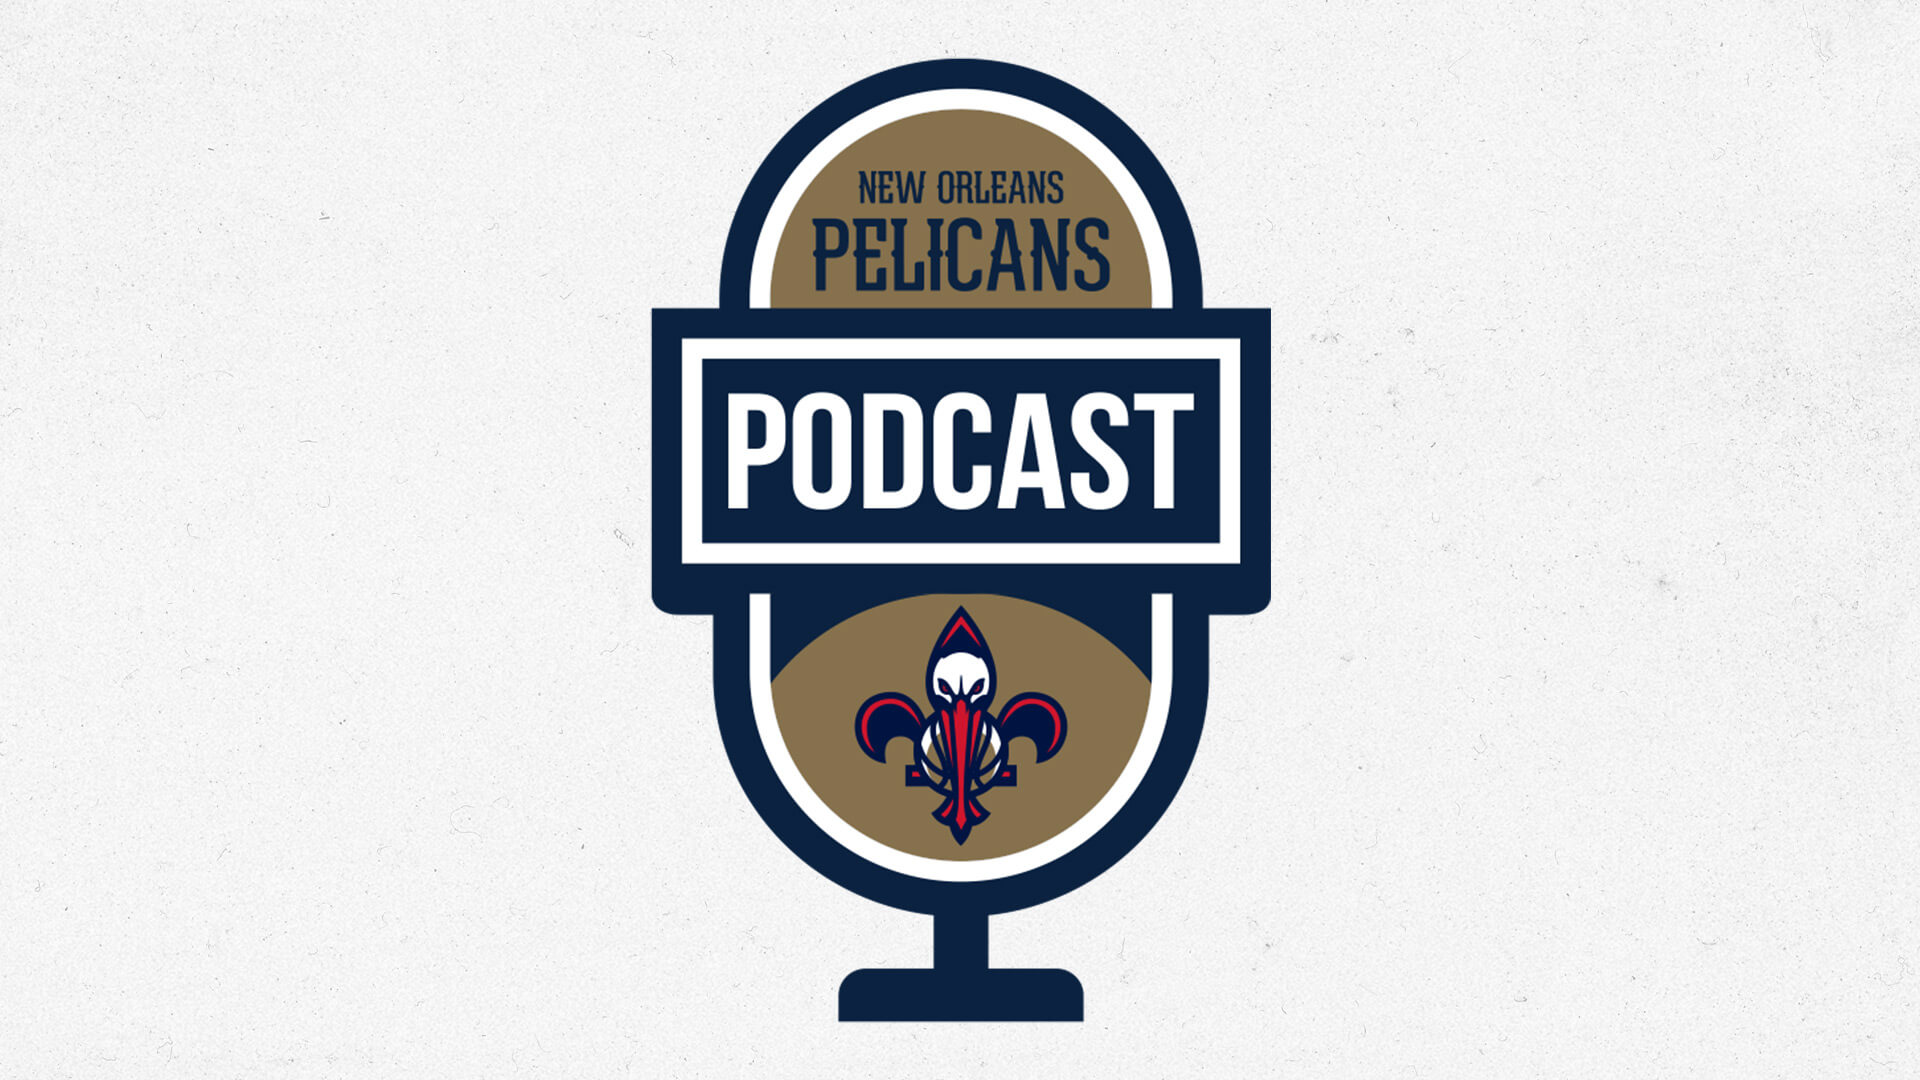 Mark Medina on the New Orleans Pelicans podcast presented by SeatGeek - April 2, 2021